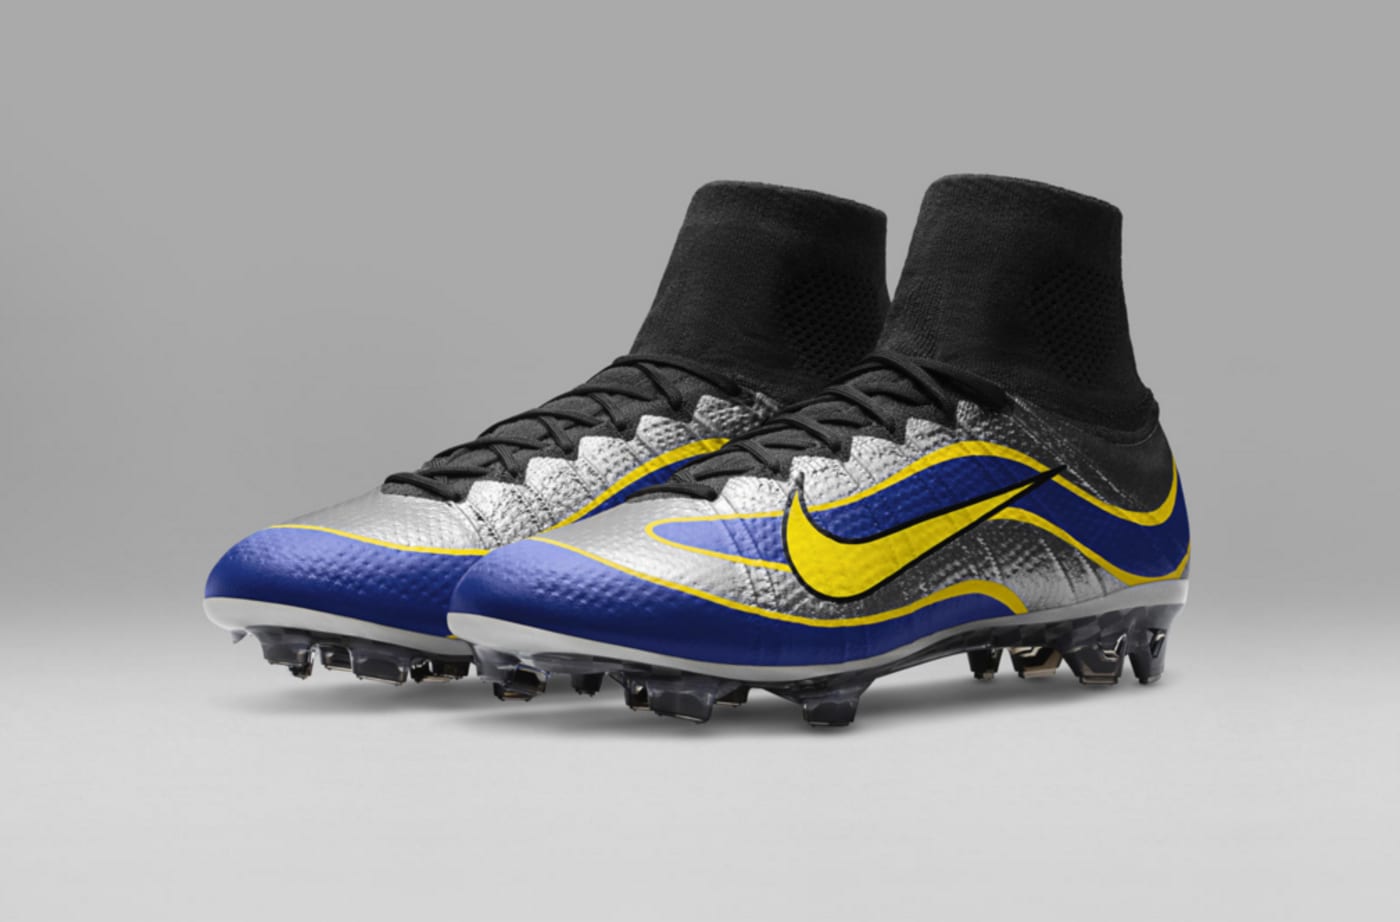 The Latest Nike Mercurial Release Is a Throwback to One of the Most